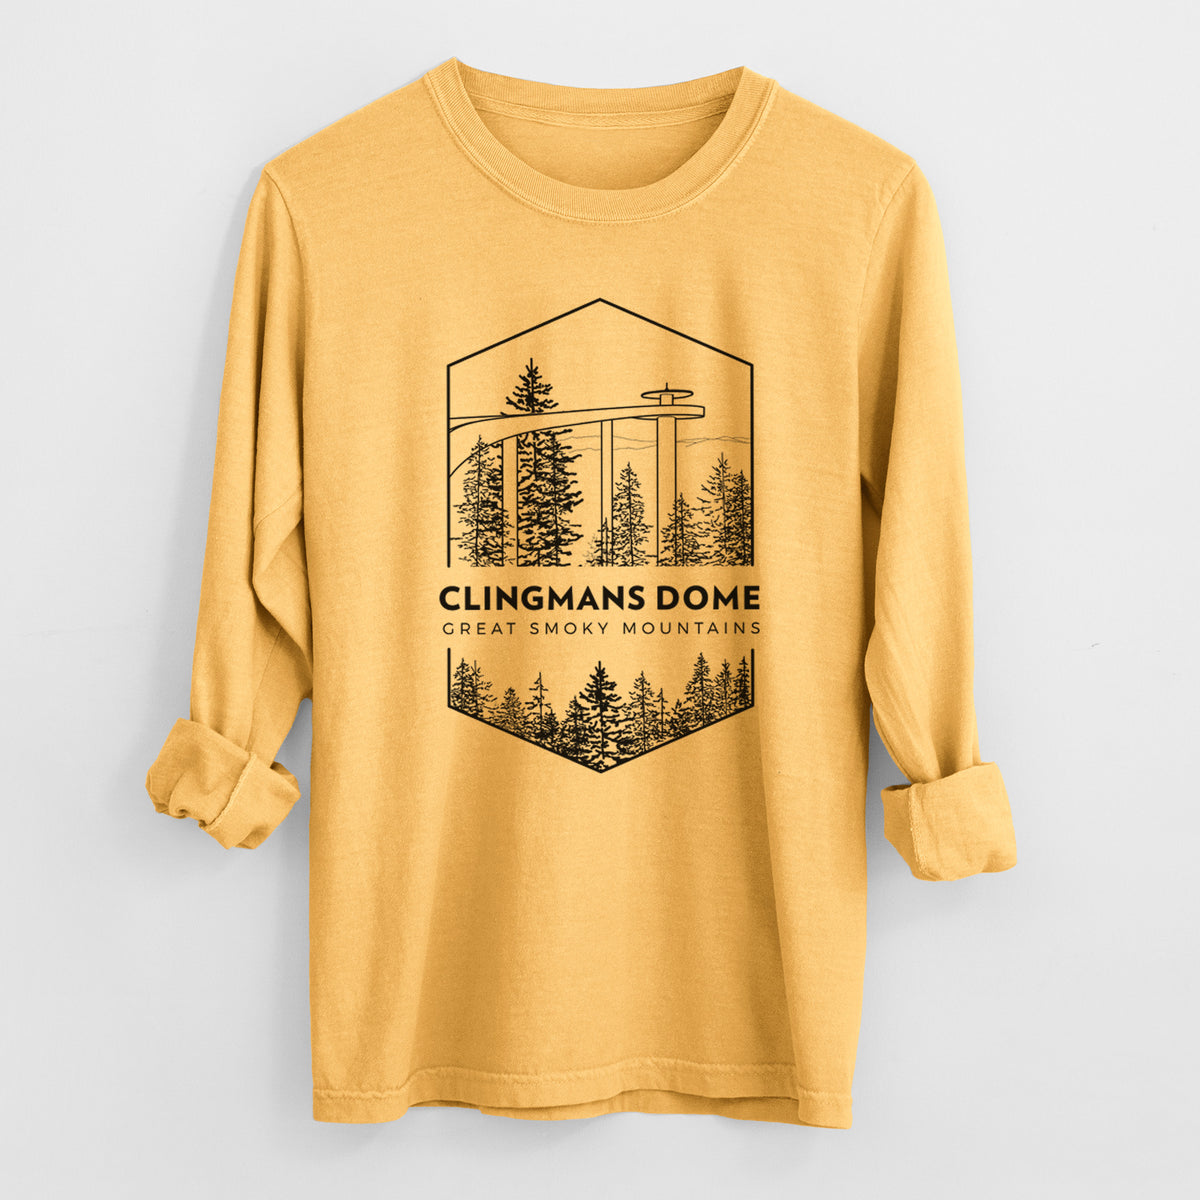 Clingmans Dome - Great Smoky Mountains National Park - Heavyweight 100% Cotton Long Sleeve